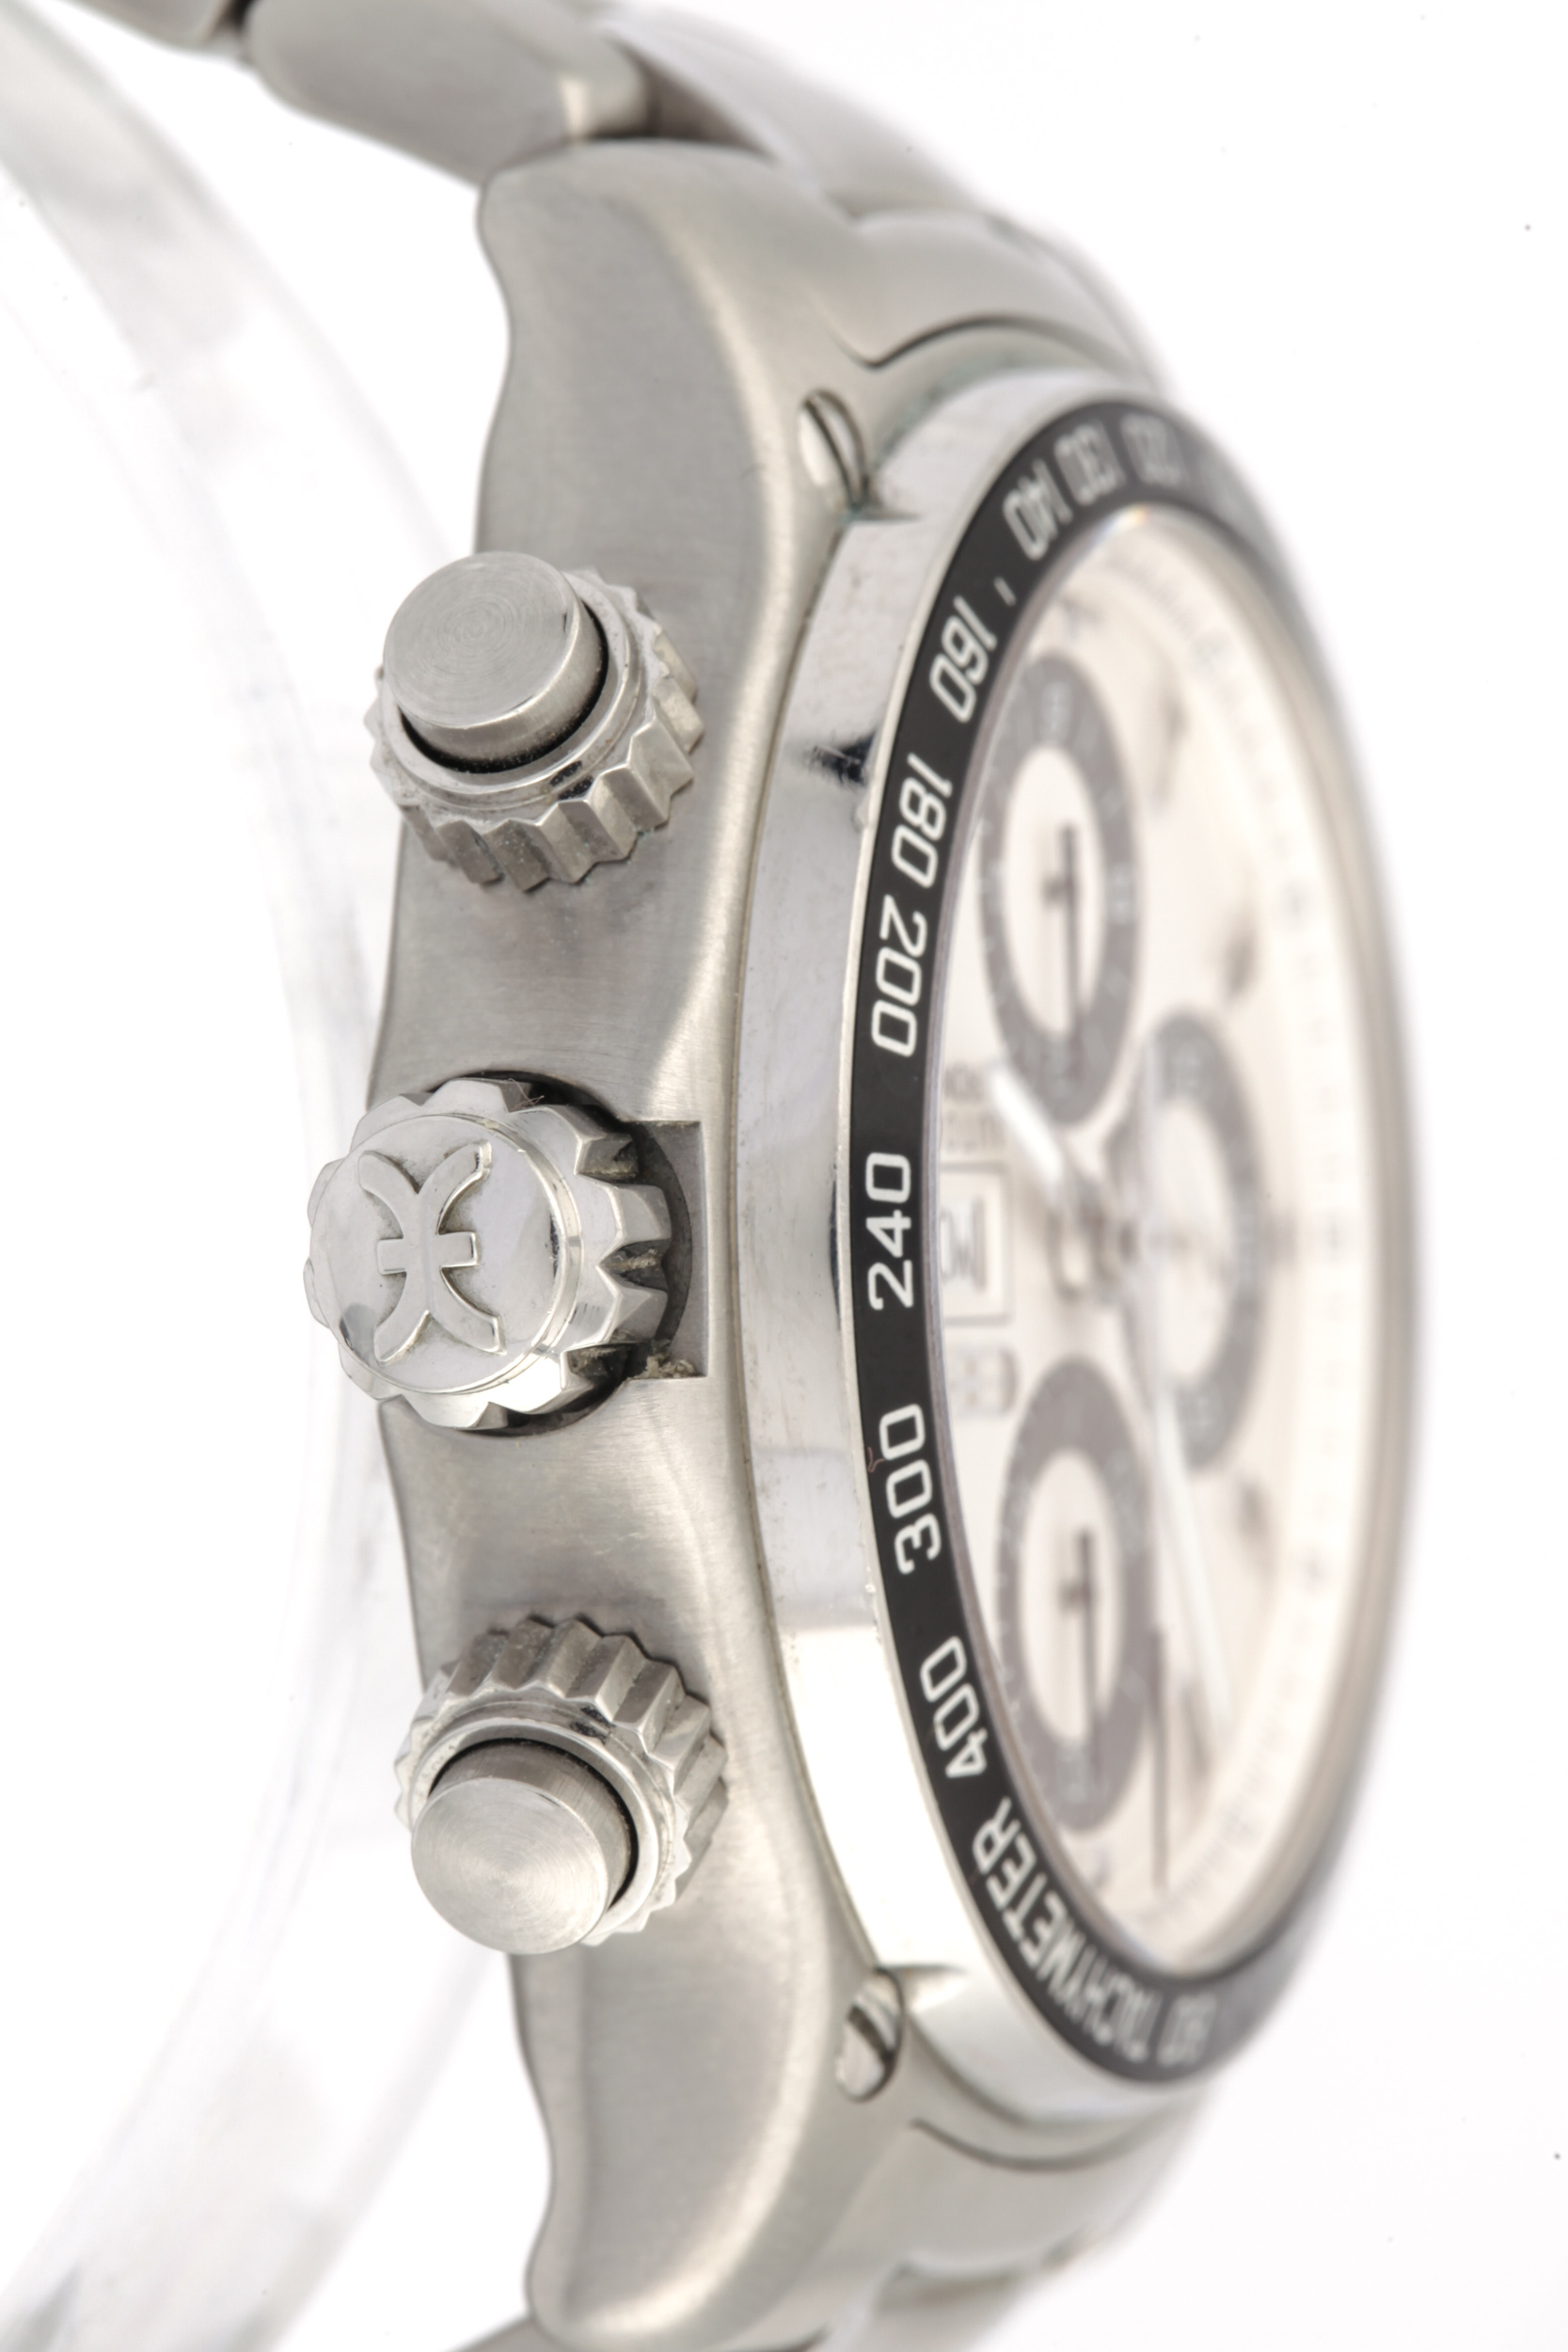 Ebel, Discovery 1911, a gentleman's automatic day/date chronometer bracelet watch. - Image 3 of 6